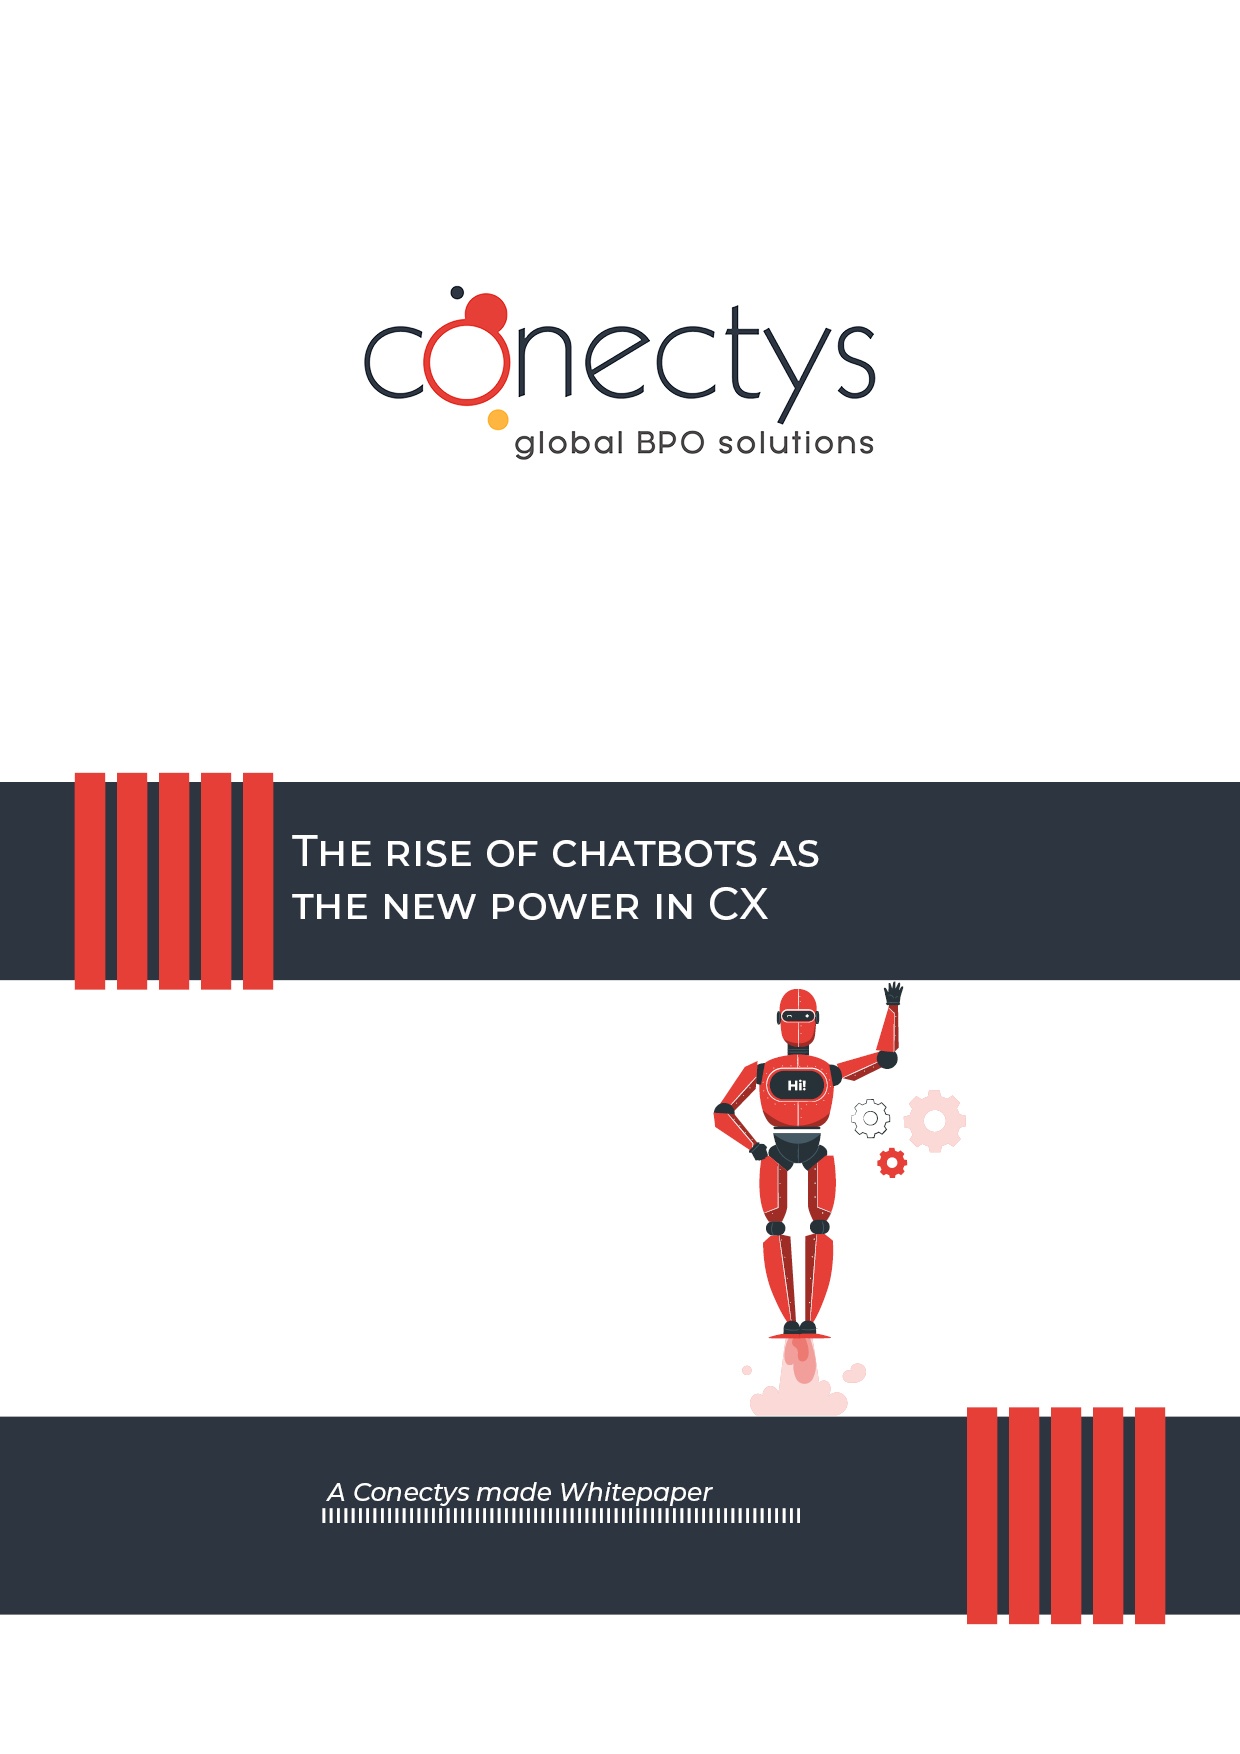 The rise of chatbots and what it means for CX